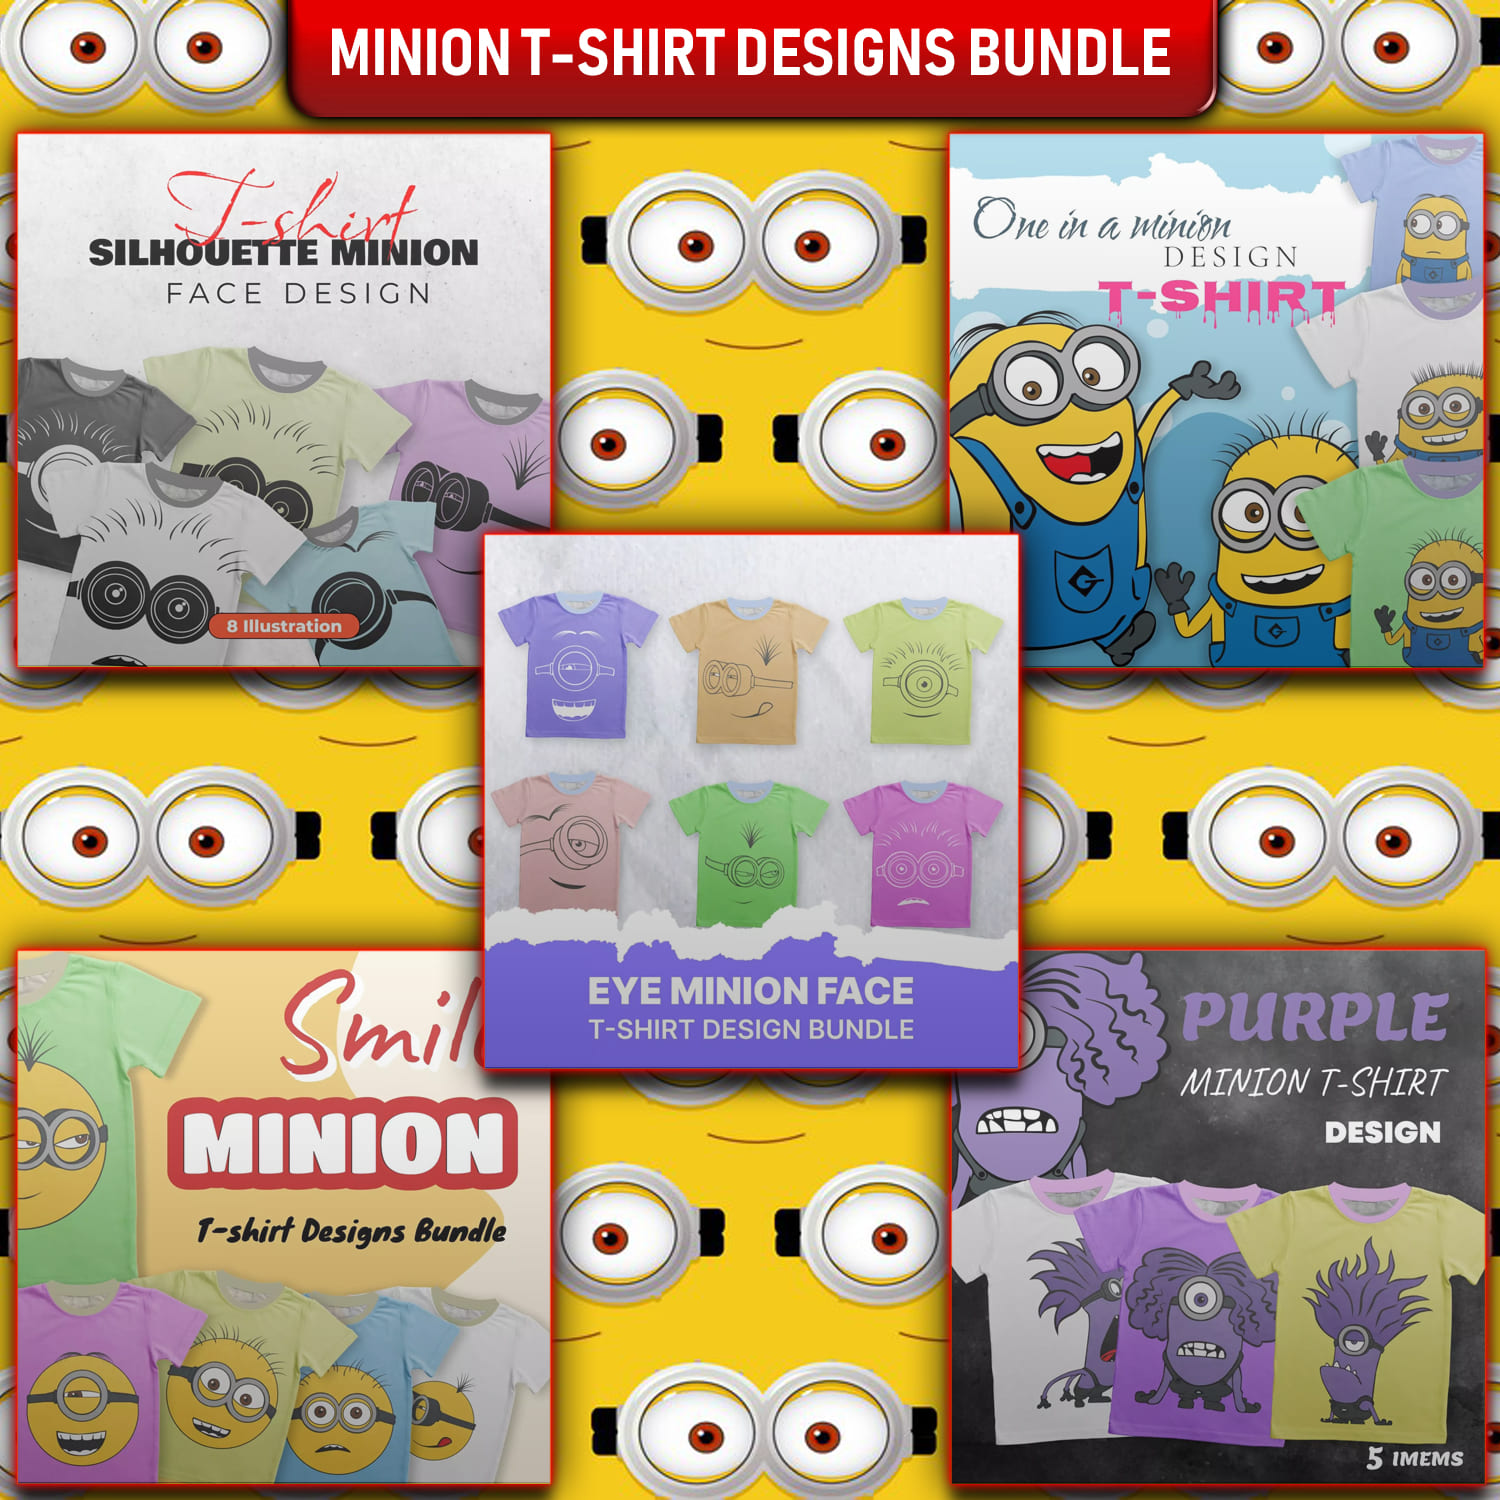 A collection of adorable minion cover images.